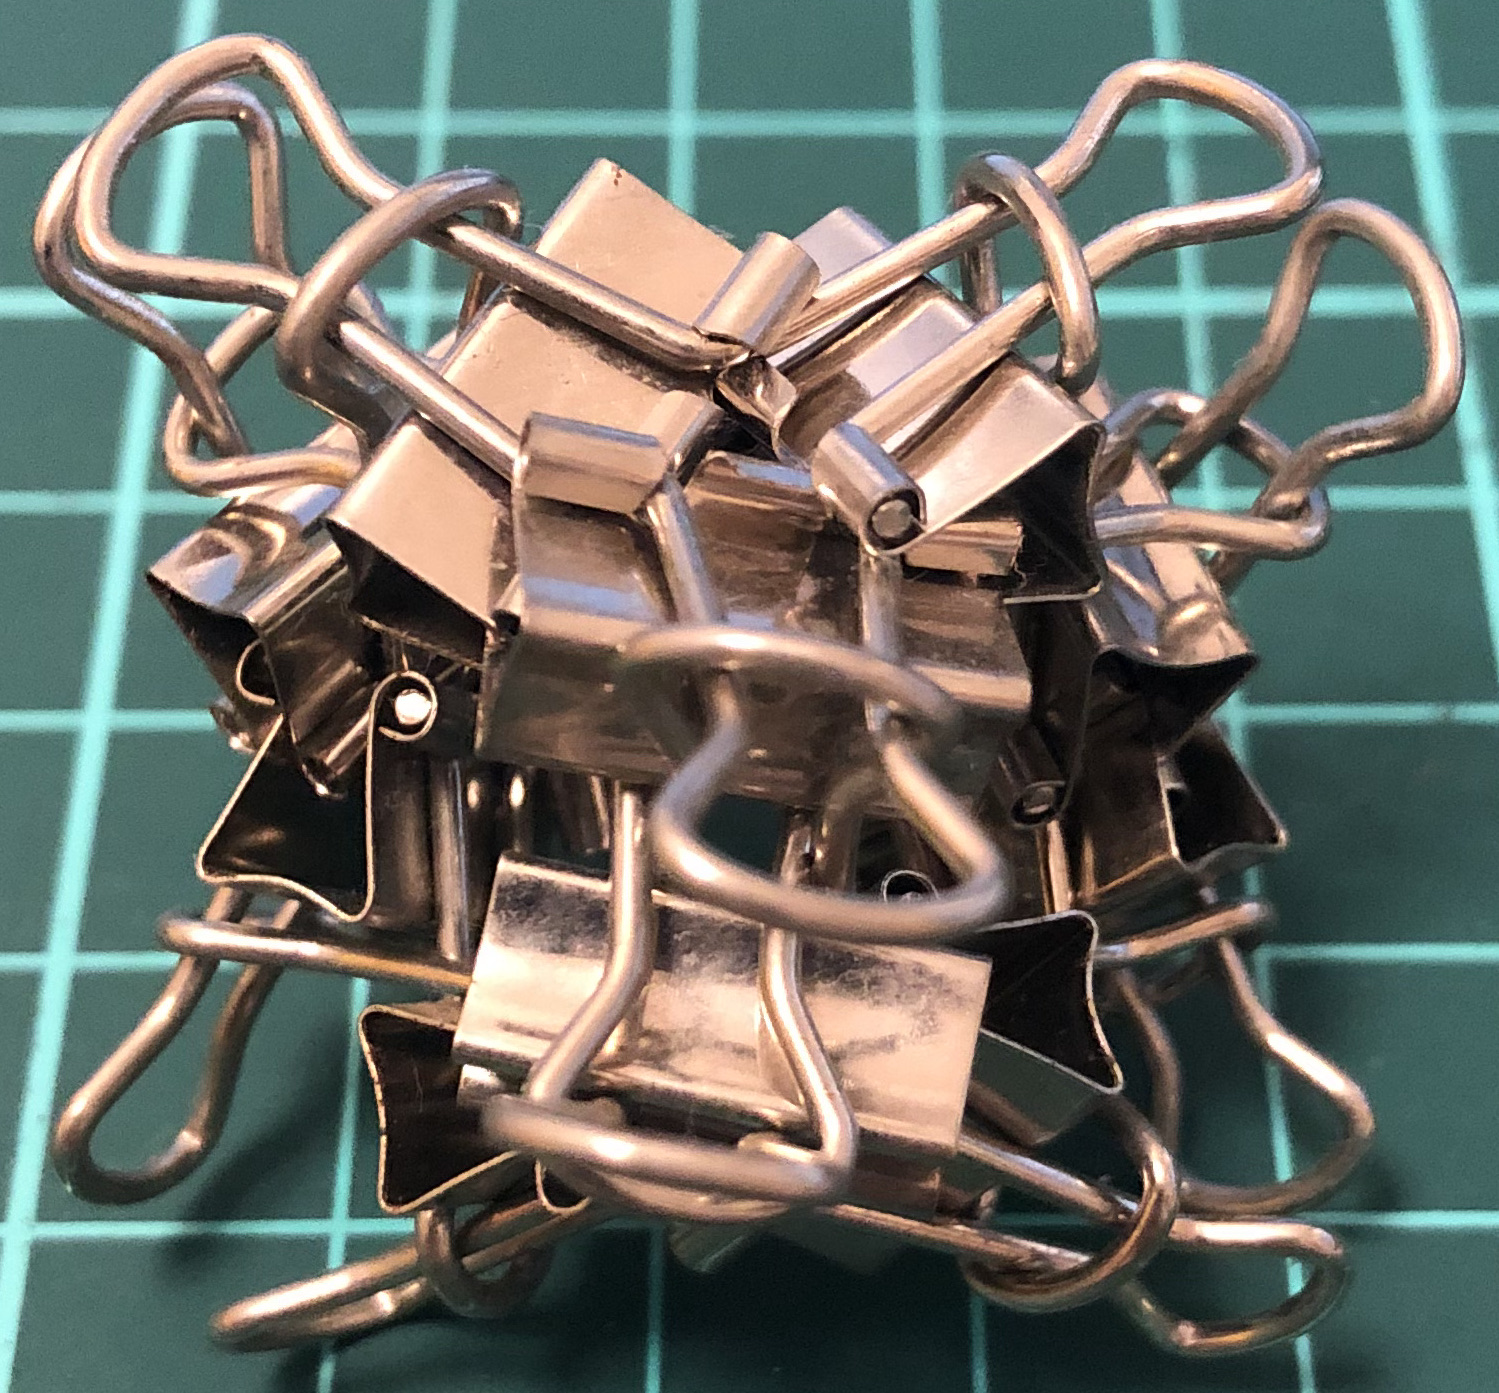 12 clips forming 6 W-edges forming tetrahedron